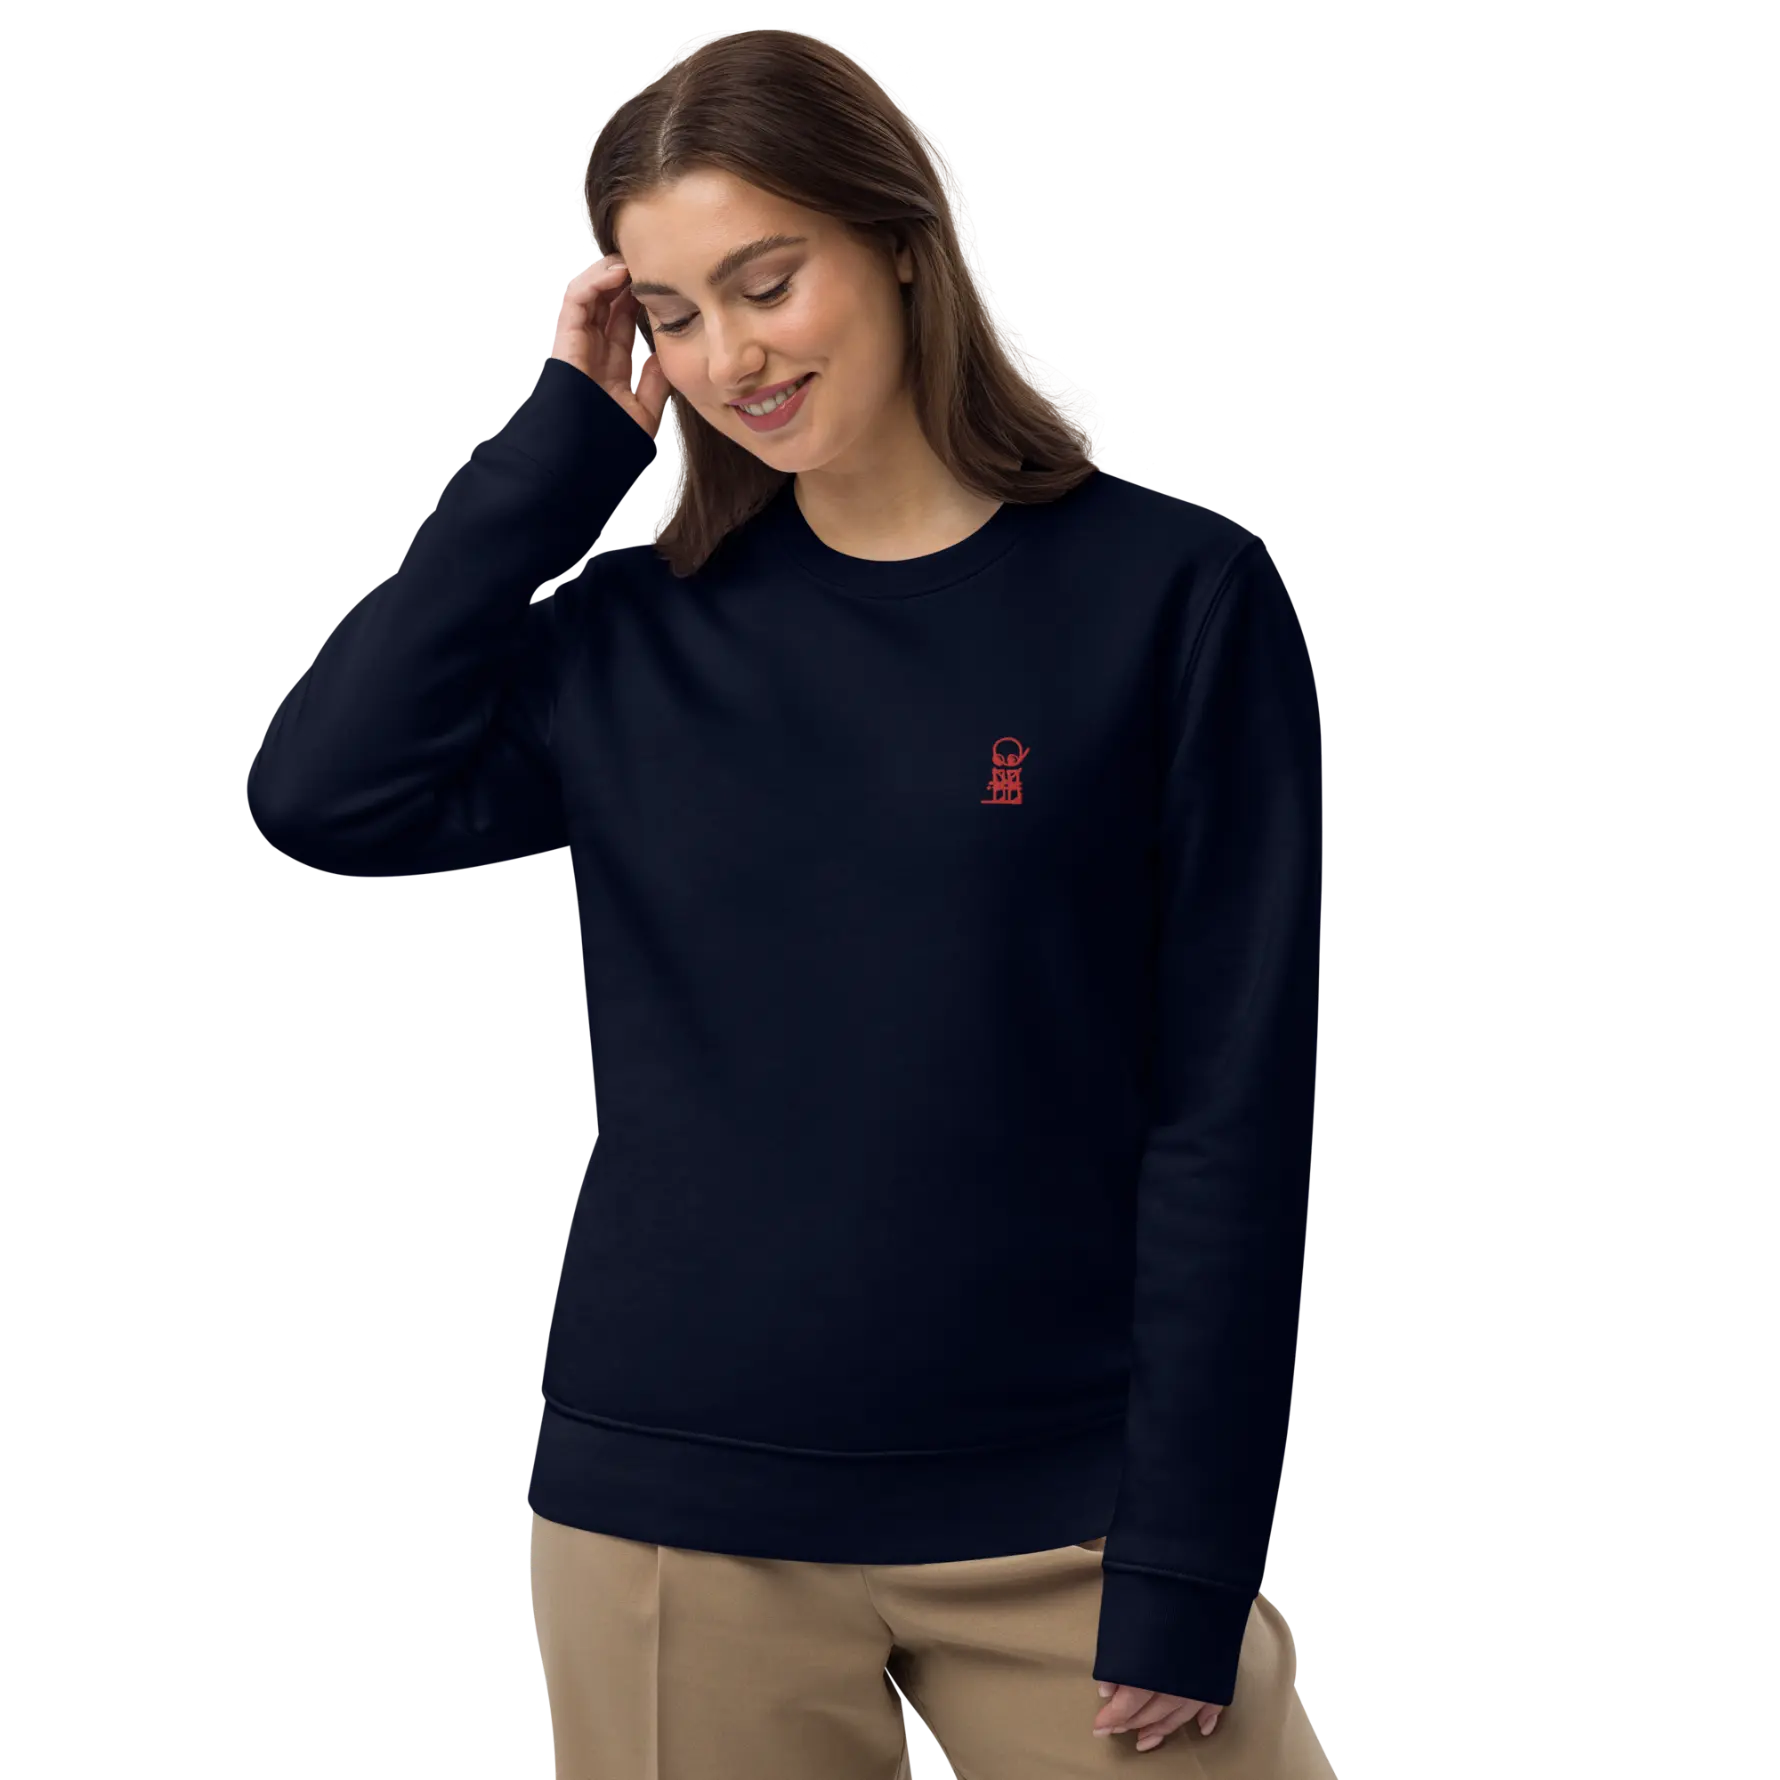 unisex-eco-sweatshirt-french-navy-front-656d40247a8b7